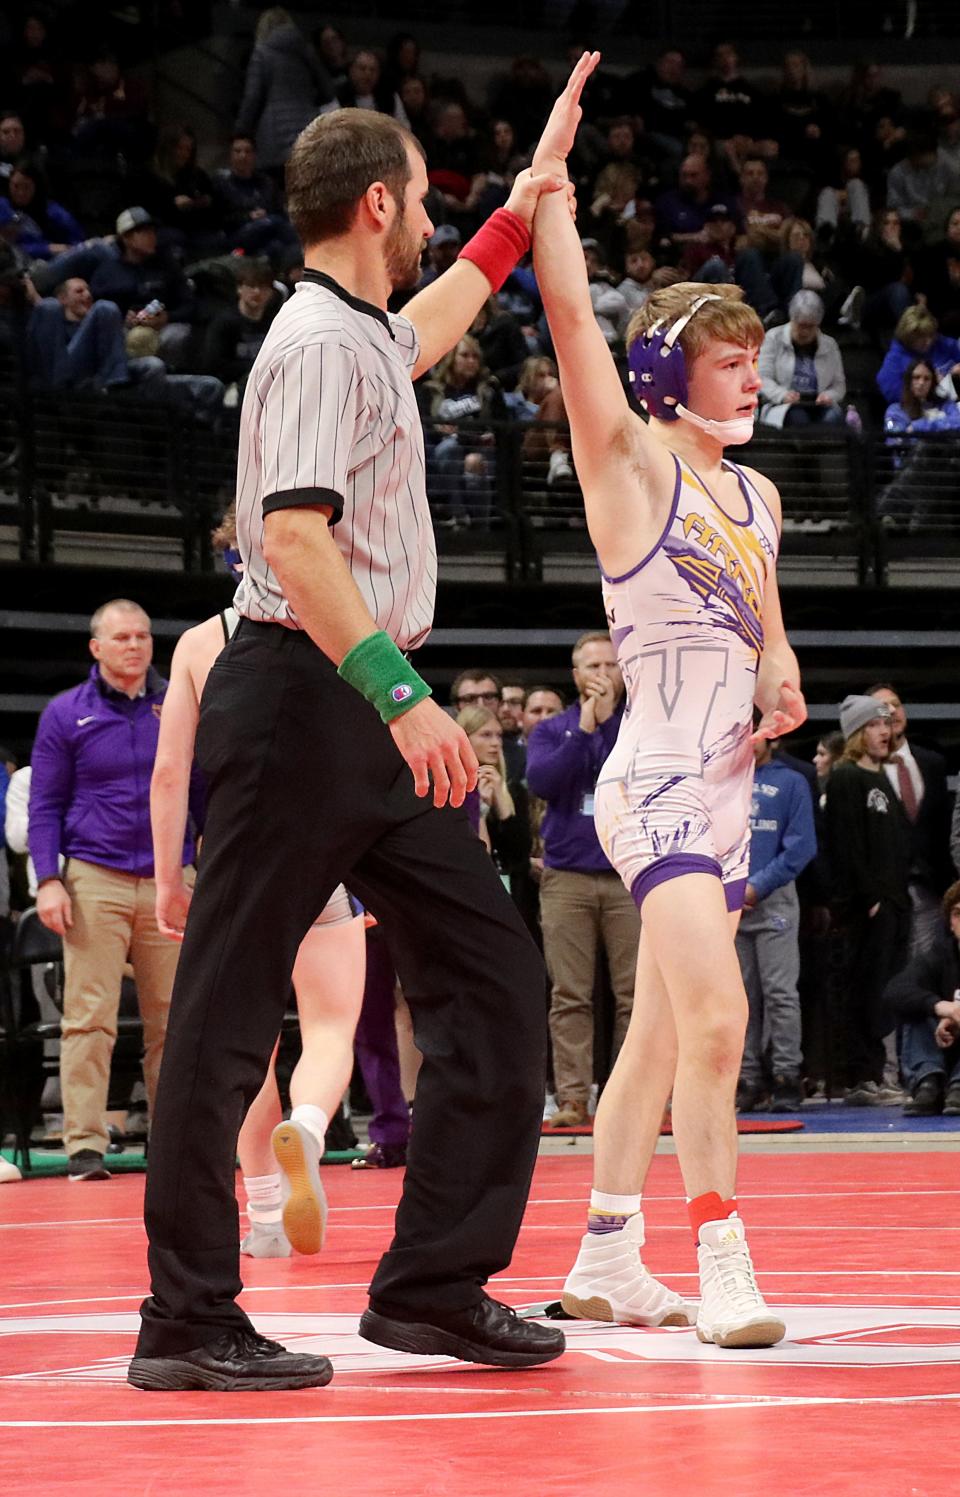 Watertown junior Sloan Johannsen has his arm raised after winning the Class A 120-pound championship on Saturday, Feb. 24, 2023 in the South Dakota State Wrestling Championships at The Monument in Rapid City.